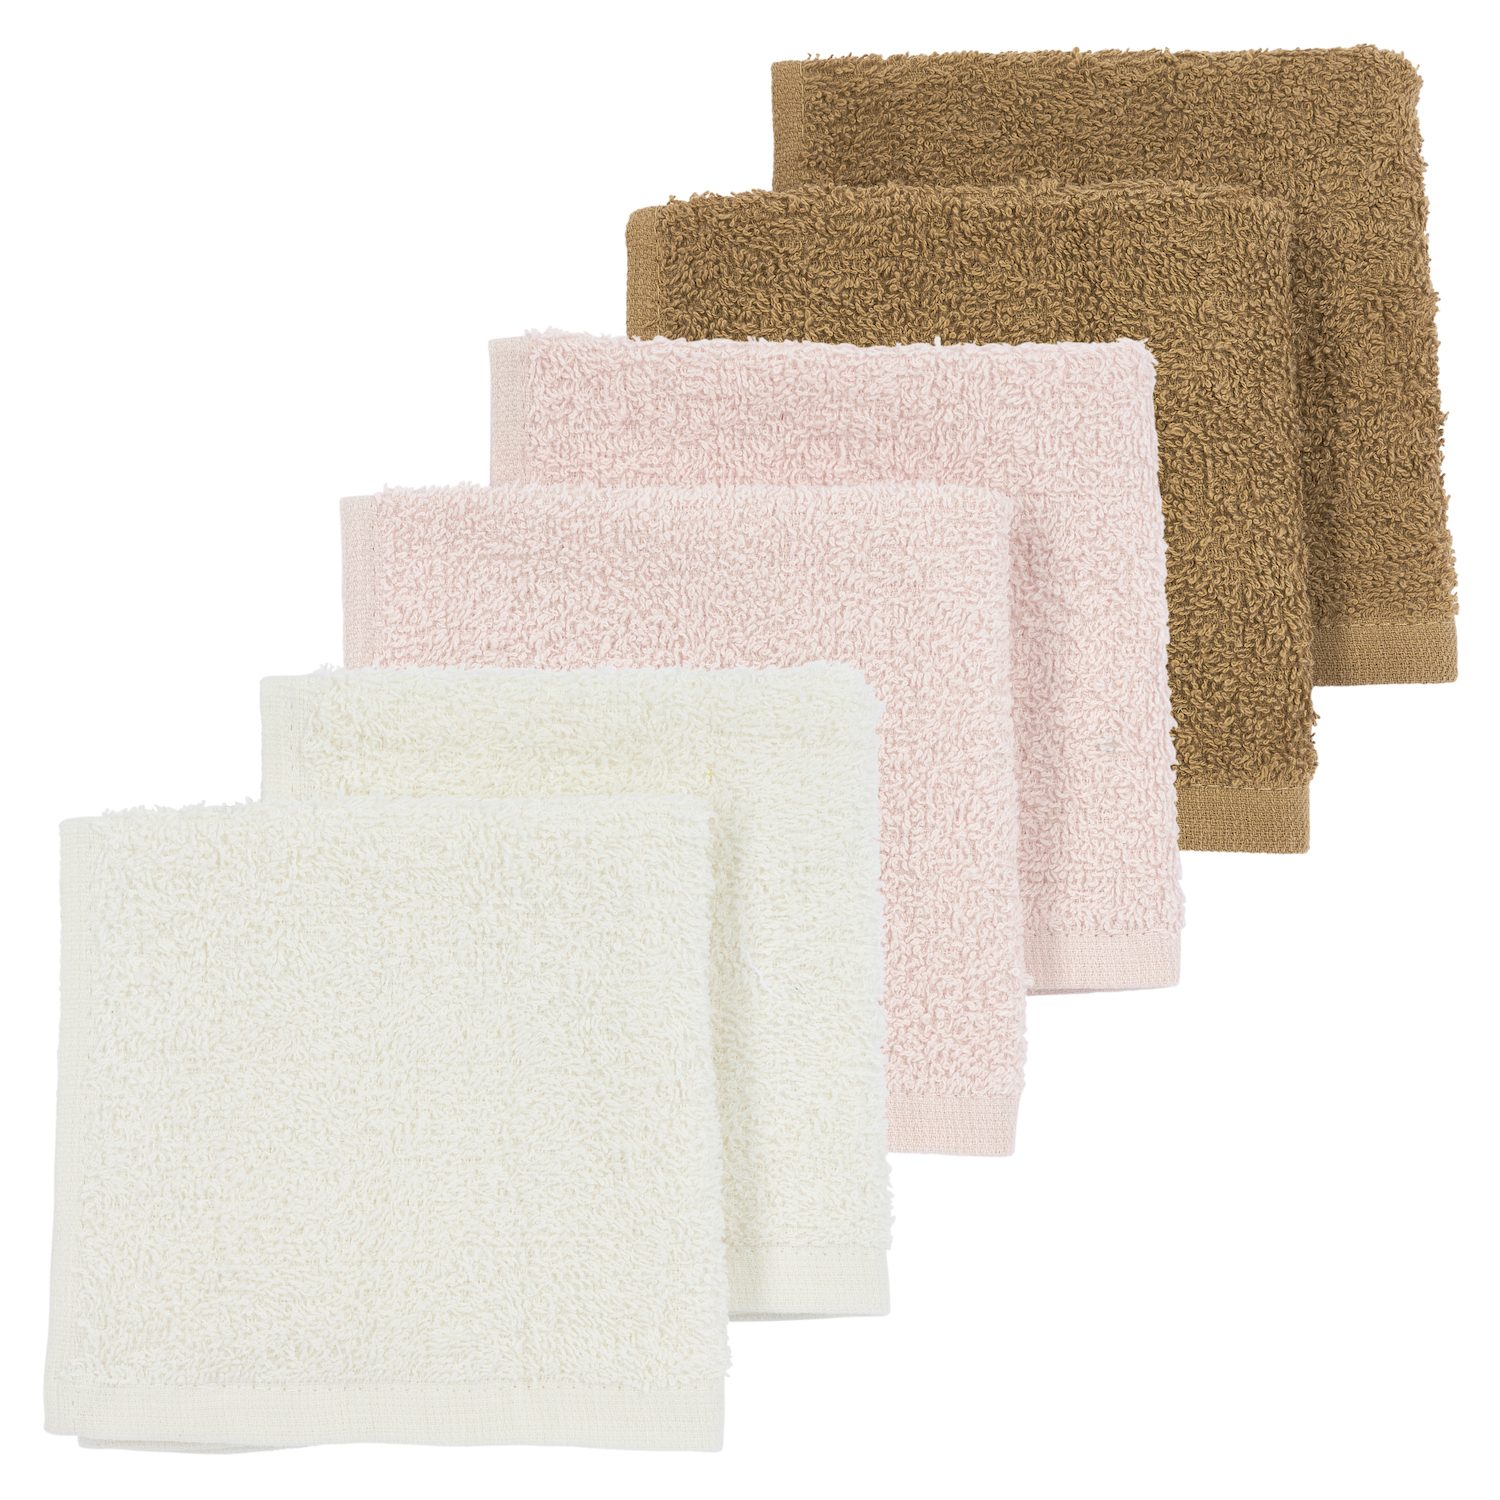 Spucktücher Frottee 6-pack - Offwhite/Soft Pink/Toffee - 30x30cm